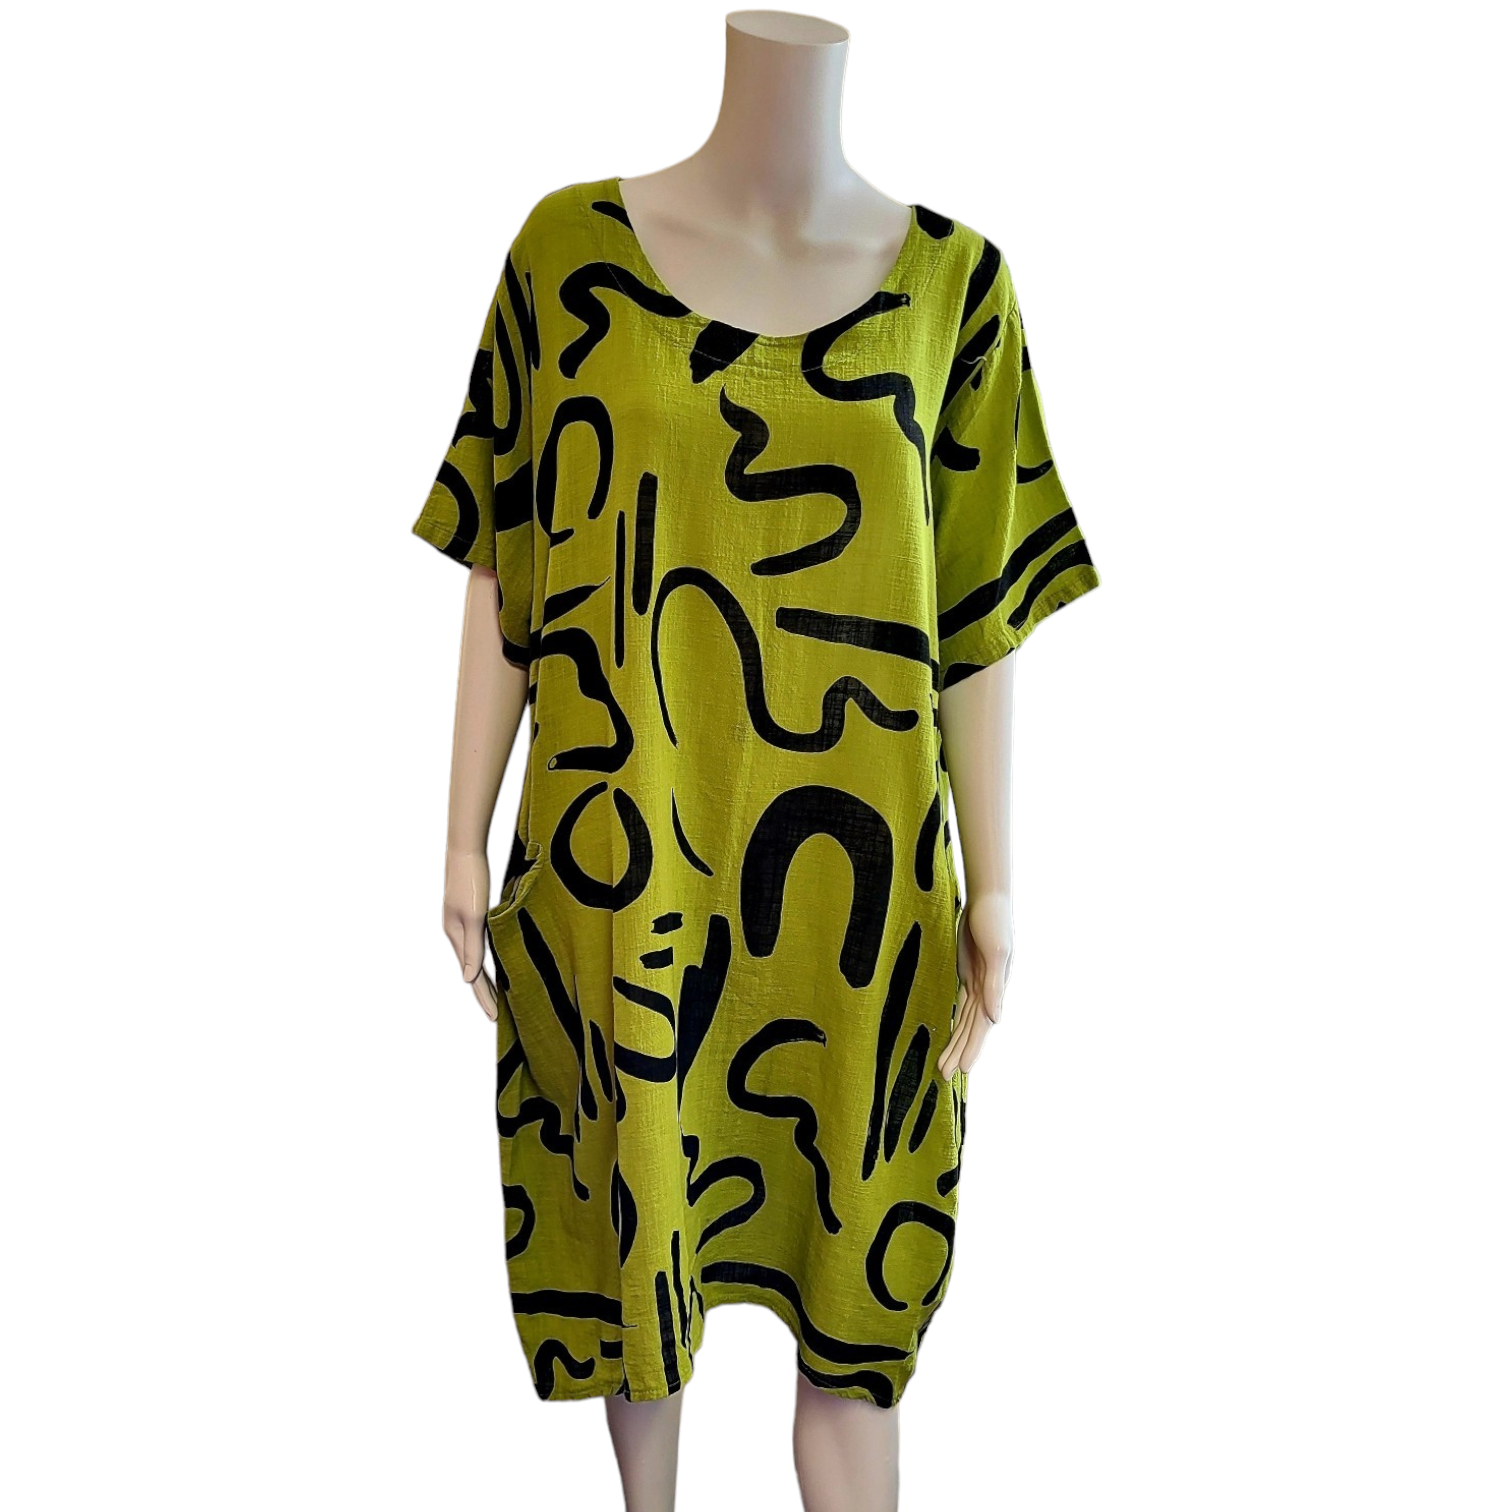 Lime green shift dress with pockets, round neck and short sleeves